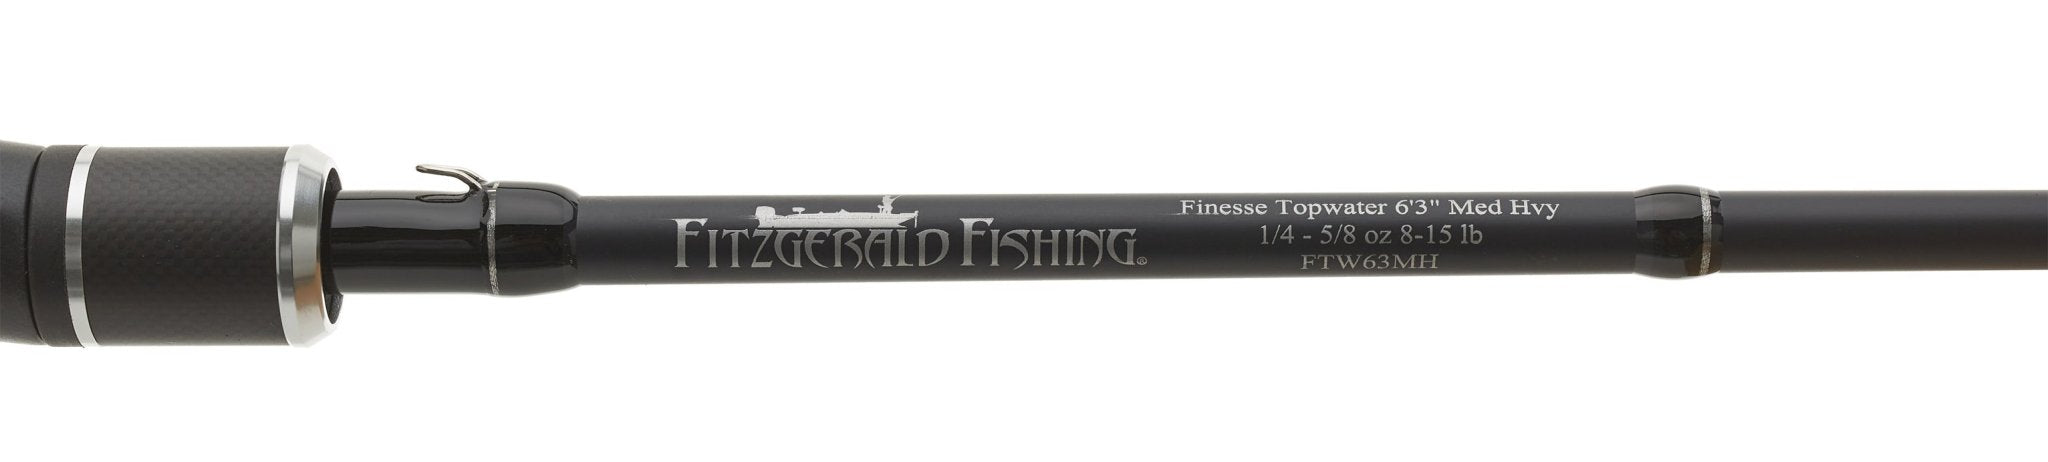 Fitzgerald Fishing Bryan Thrift Series Casting Rods - Hamilton Bait and Tackle